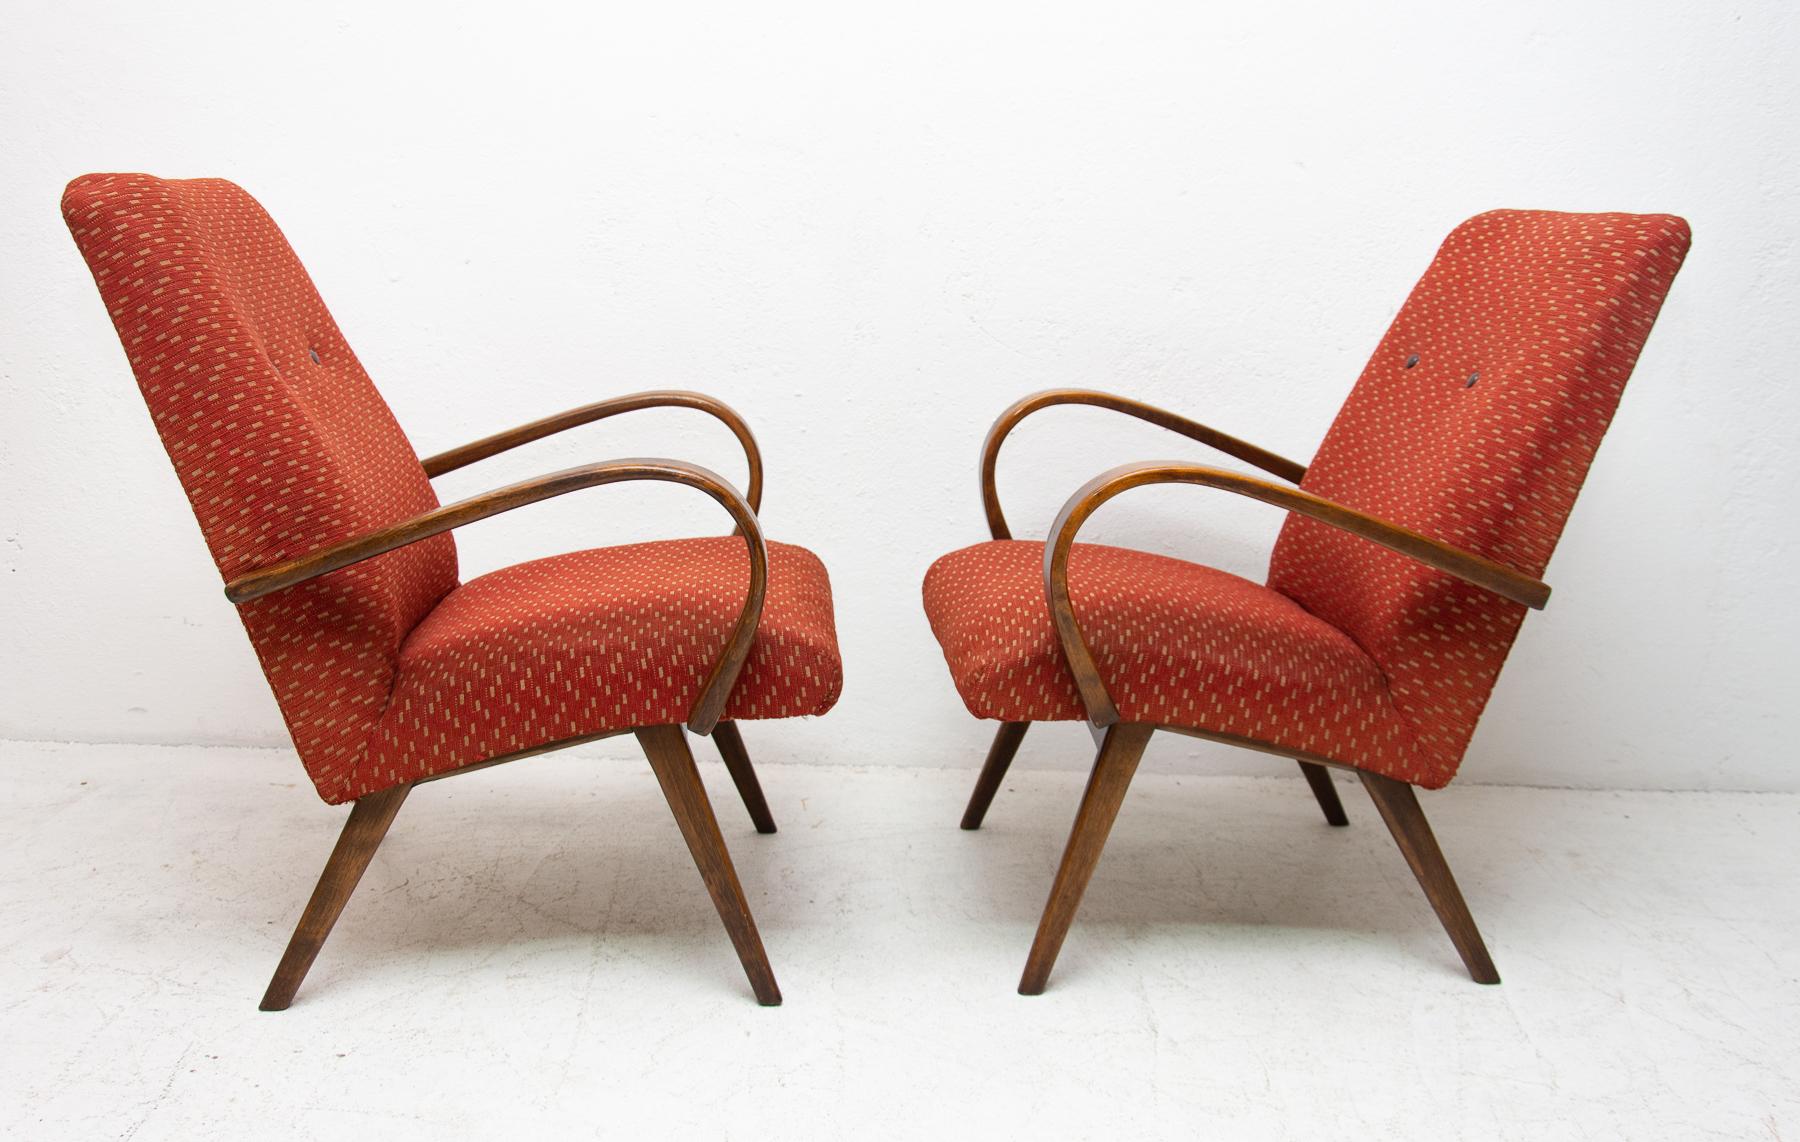 These bentwood armchairs were designed by Jaroslav Šmídek and made in the former Czechoslovakia in the 1960s.

The chairs are stable and comfortable. They are in very good Vintage condition. Price is for the pair.

Measures: Height 82